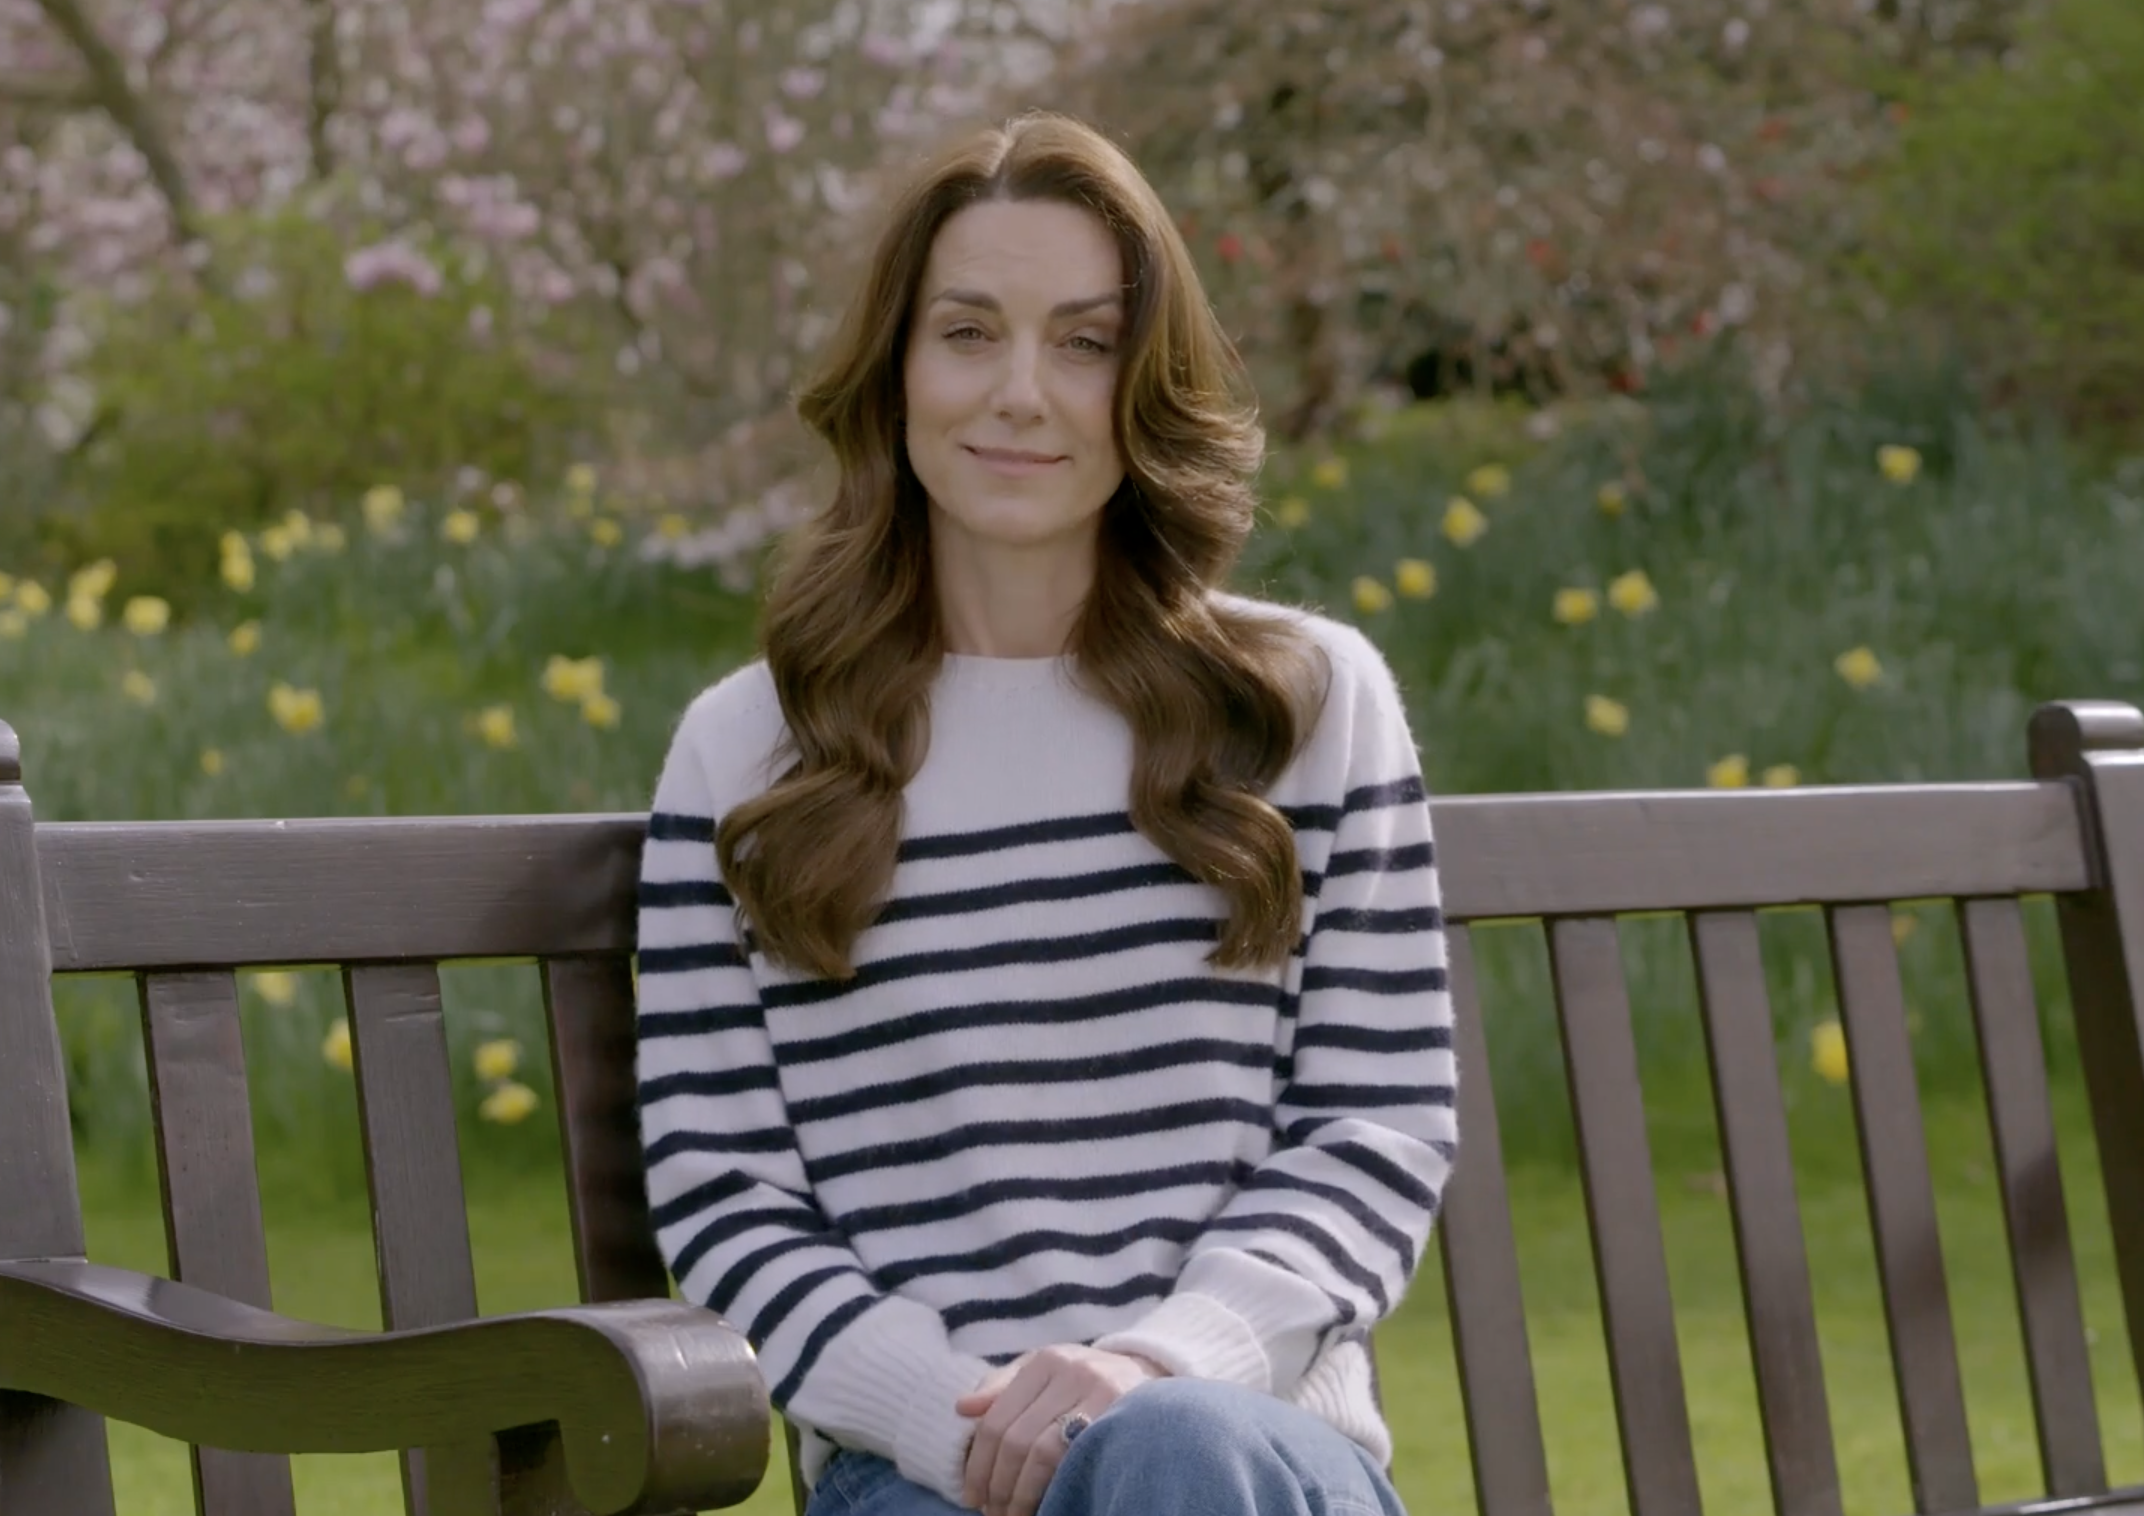 Kate Middleton’s Black and White Striped Sweater In Cancer Video Had Secret Message